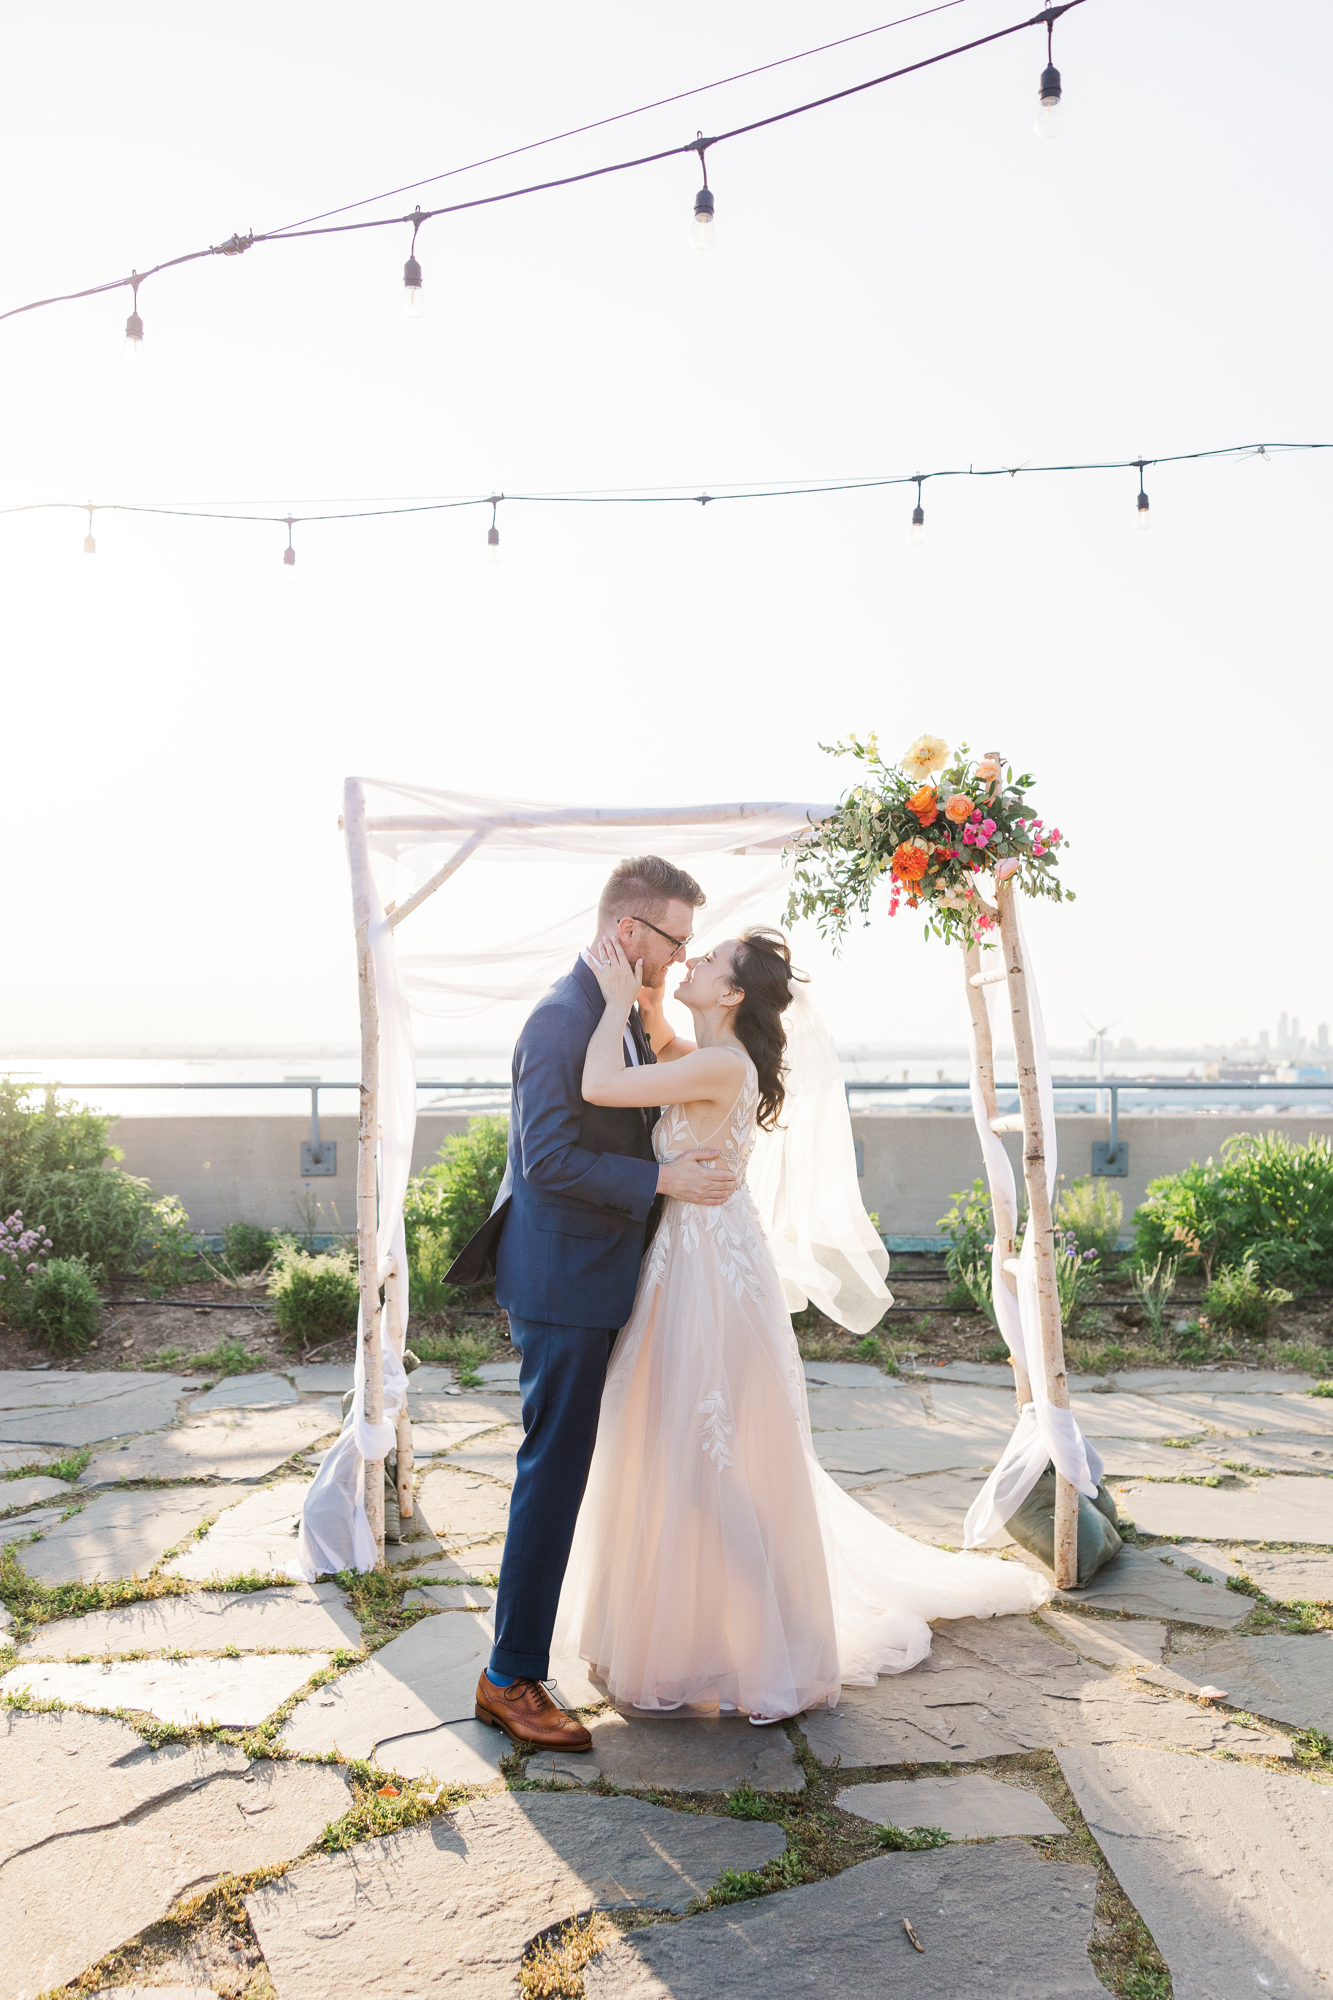 Candid Wedding at Brooklyn Grange in Sunset Park